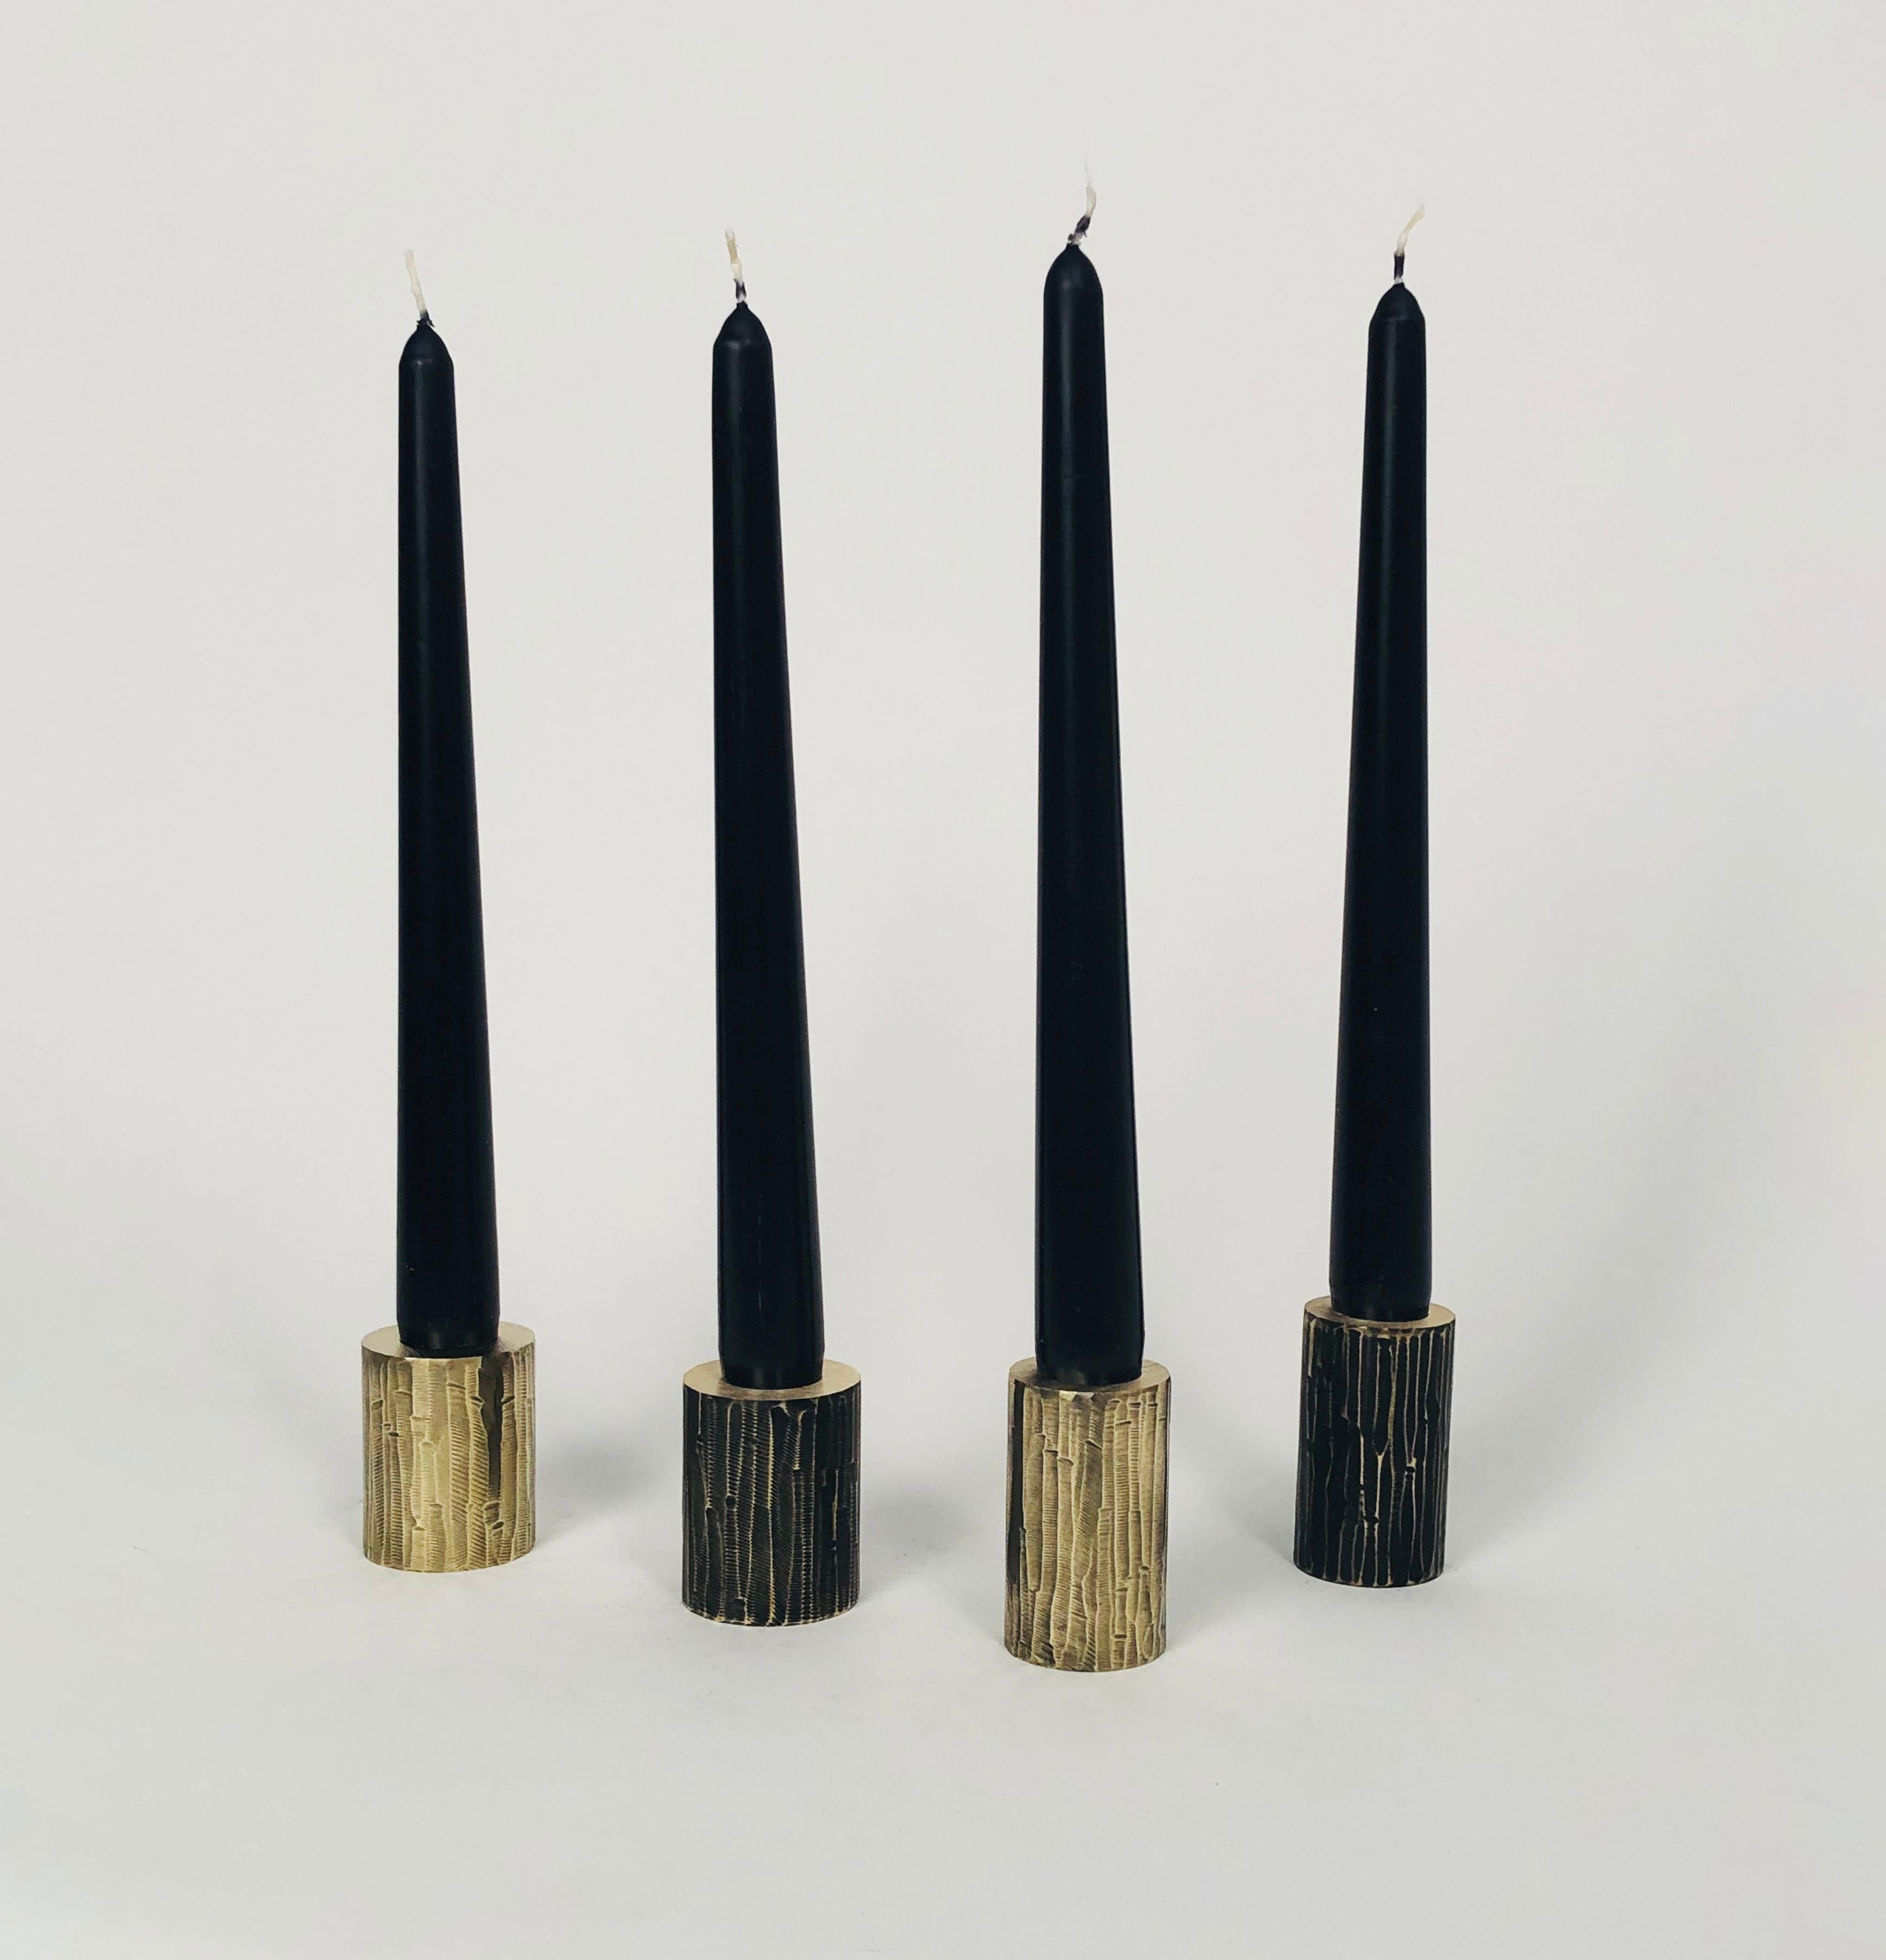 Set of 4 solid brass sculpted candleholders by William Guillon 
[Each is signed by William Guillon]
Dimensions: diameter 4 x height 5 cm. Diameter 3.5 x height 6 cm.
Materials: Solid brass raw finish or patinated black, with polished